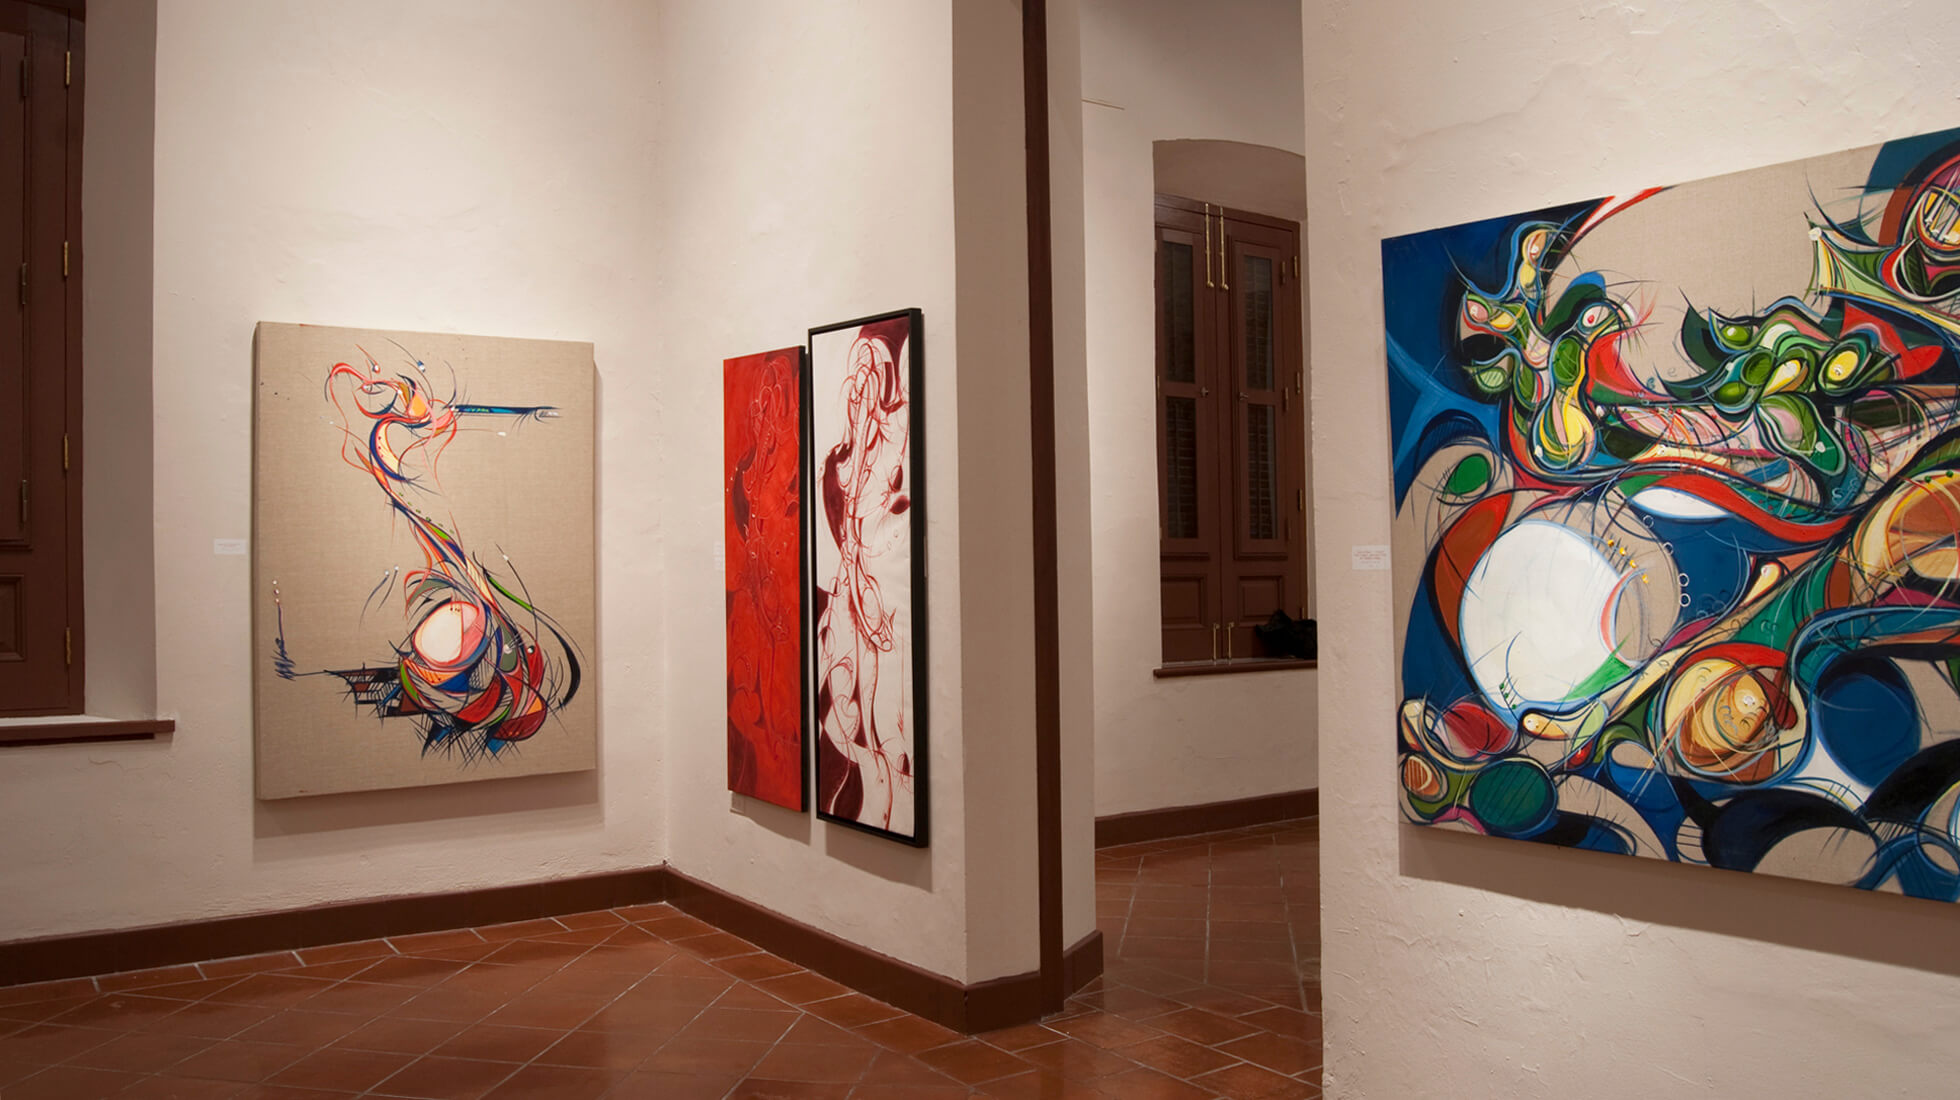 Photo of the Salon D of artist and painter Michael J. Korber at his Art Retrospective at the Museo de las Américas in Old San Juan, Puerto Rico, titled - A decade of line and color, in 2007.